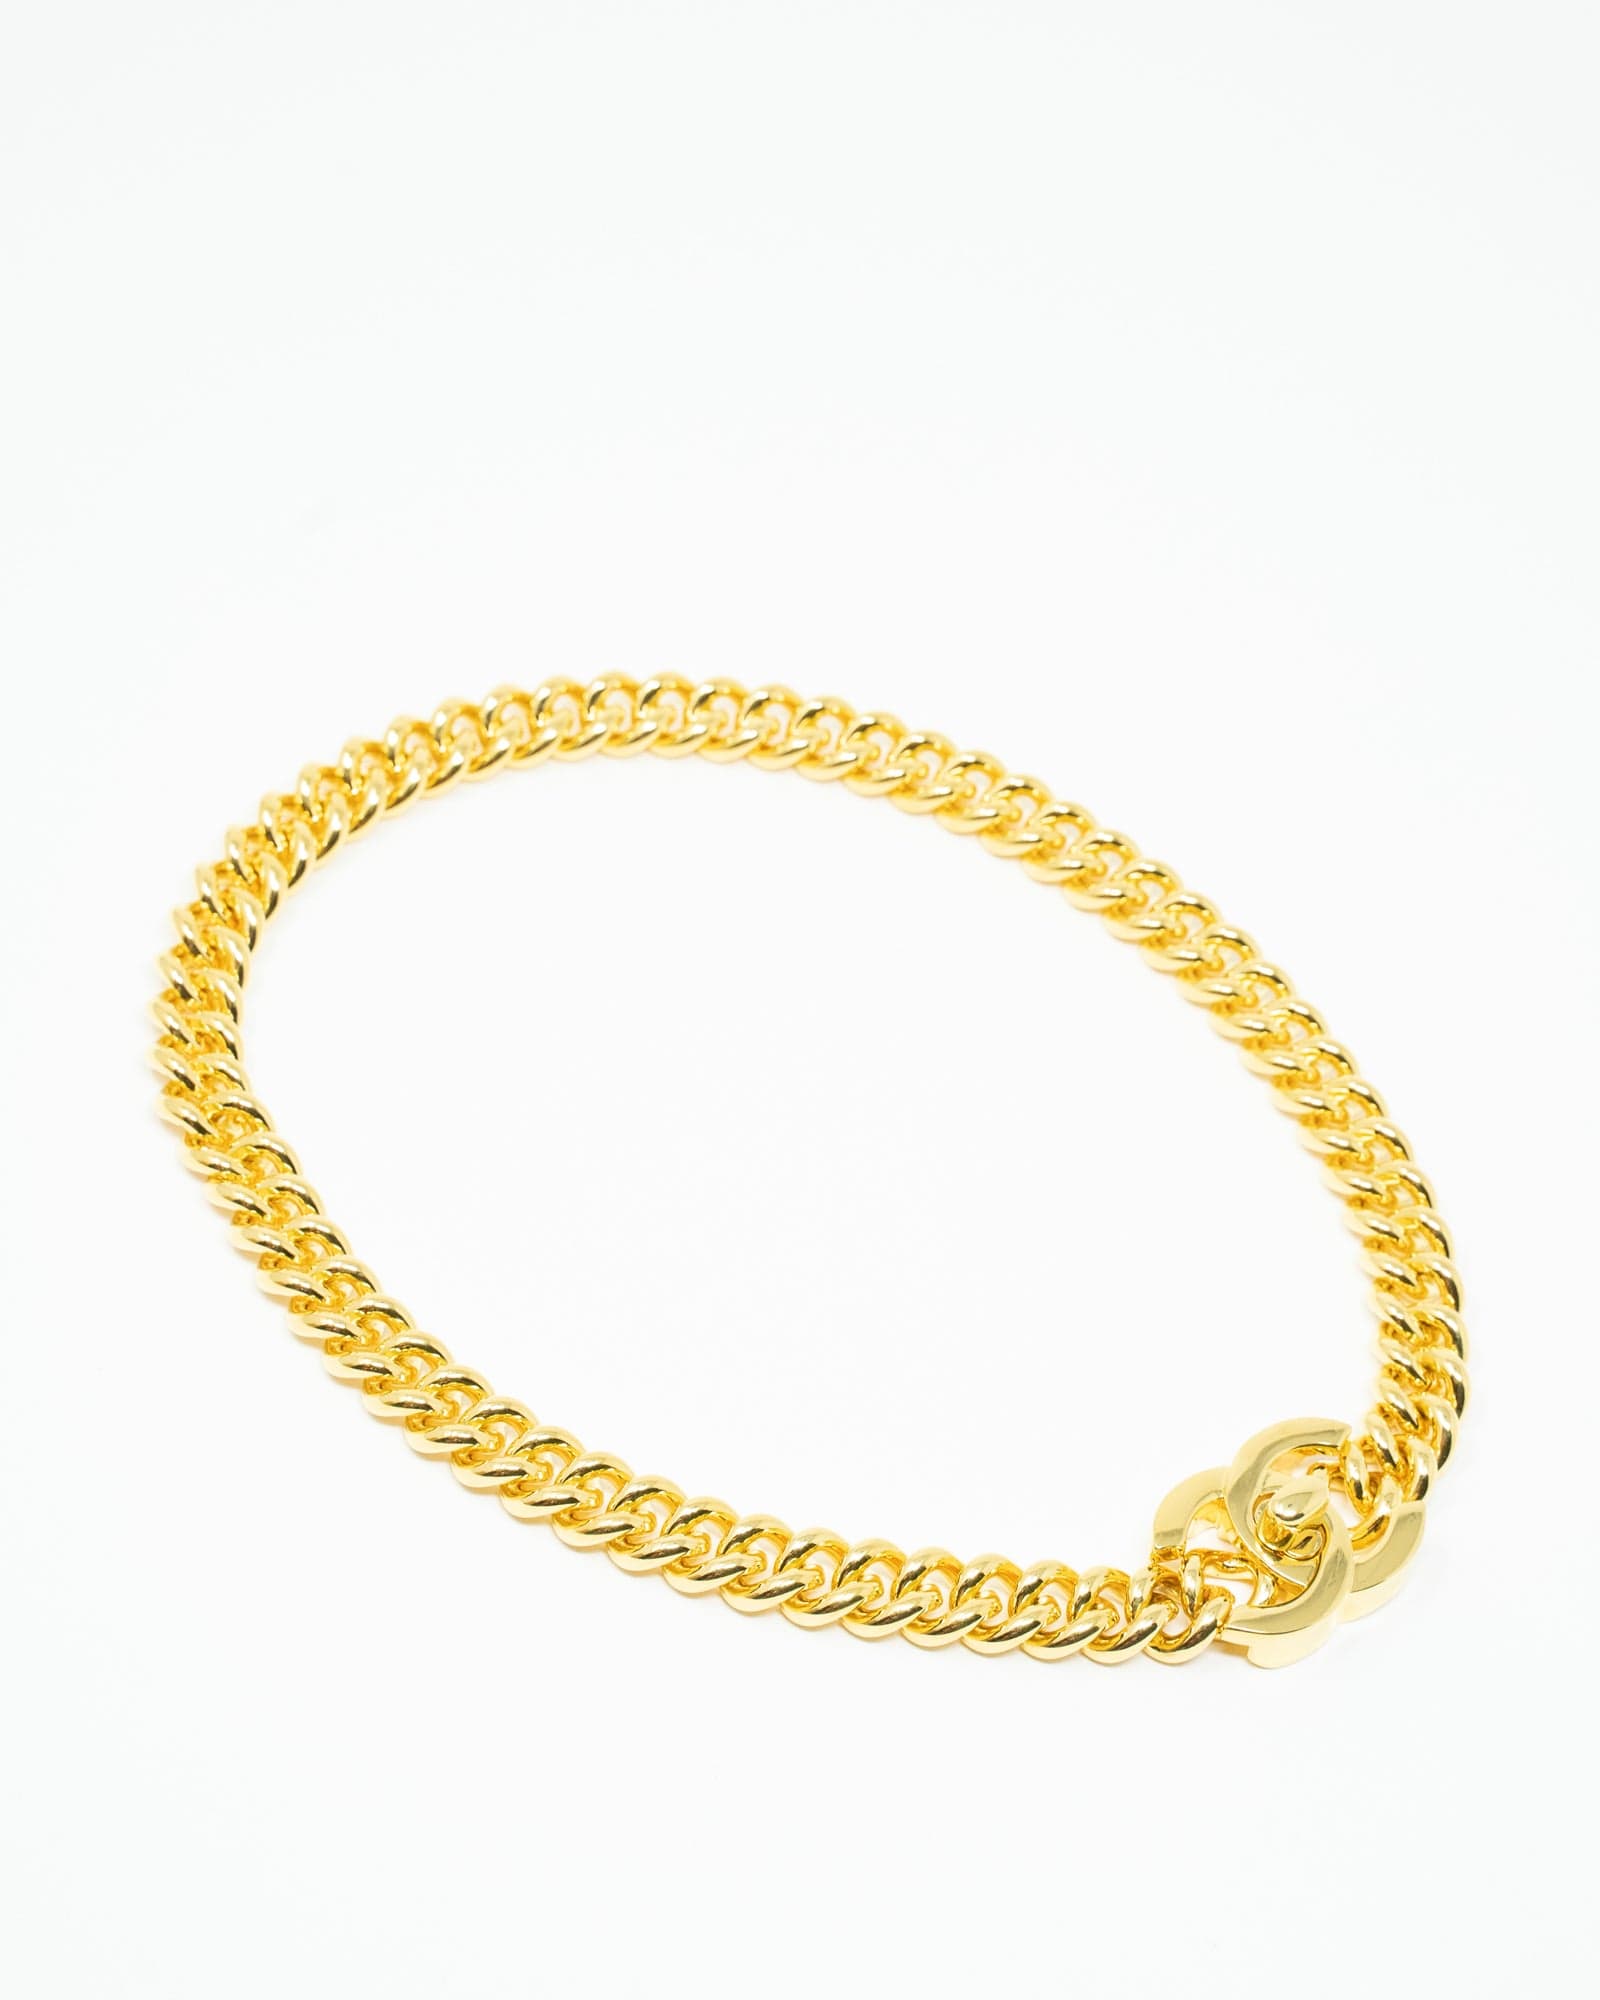 CHANEL Chain Link CC Turn Lock Choker Necklace Gold 440233